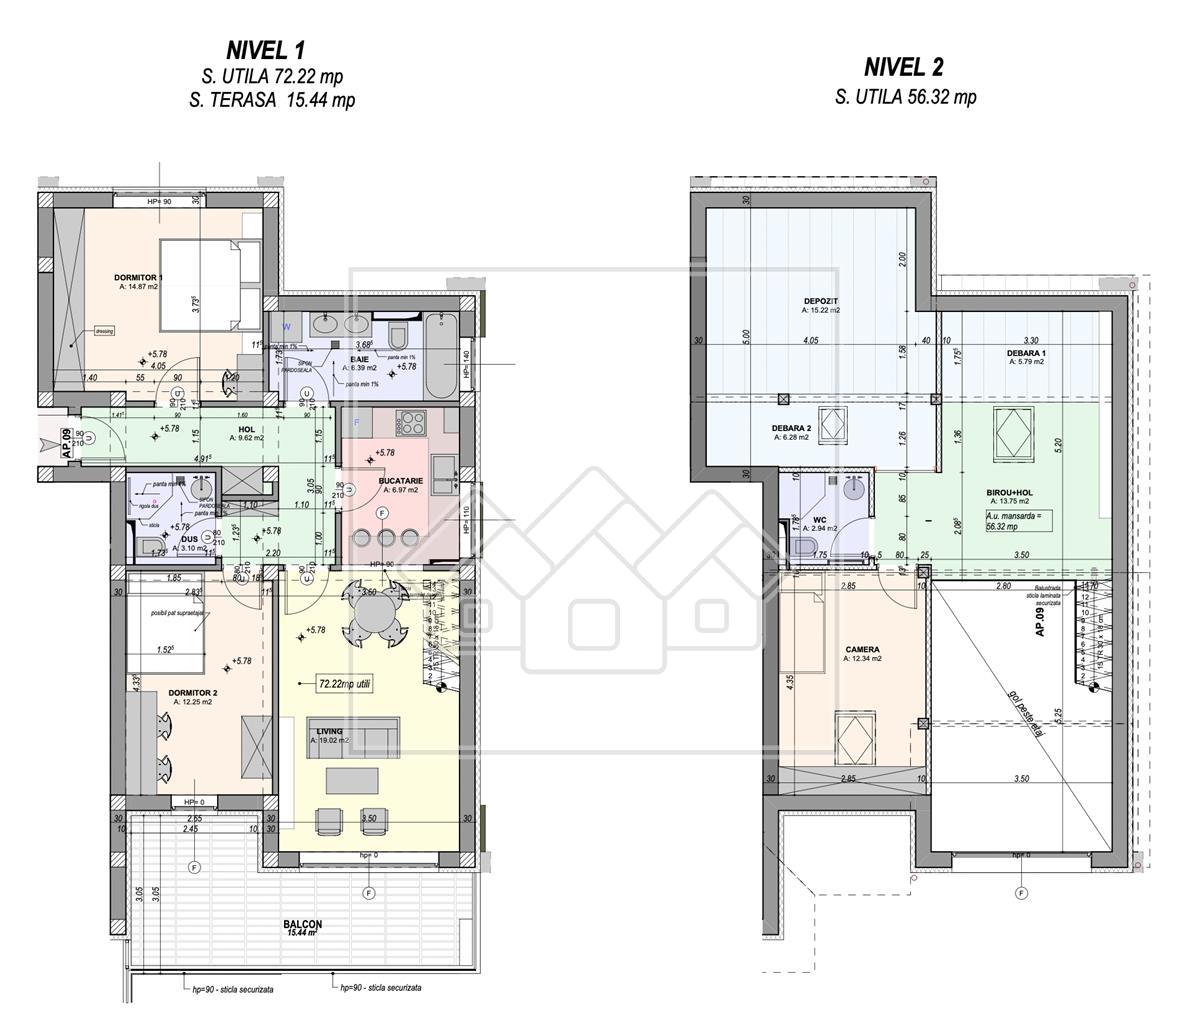 Penthouse on 2 levels - special concept, 115 square meters (R)